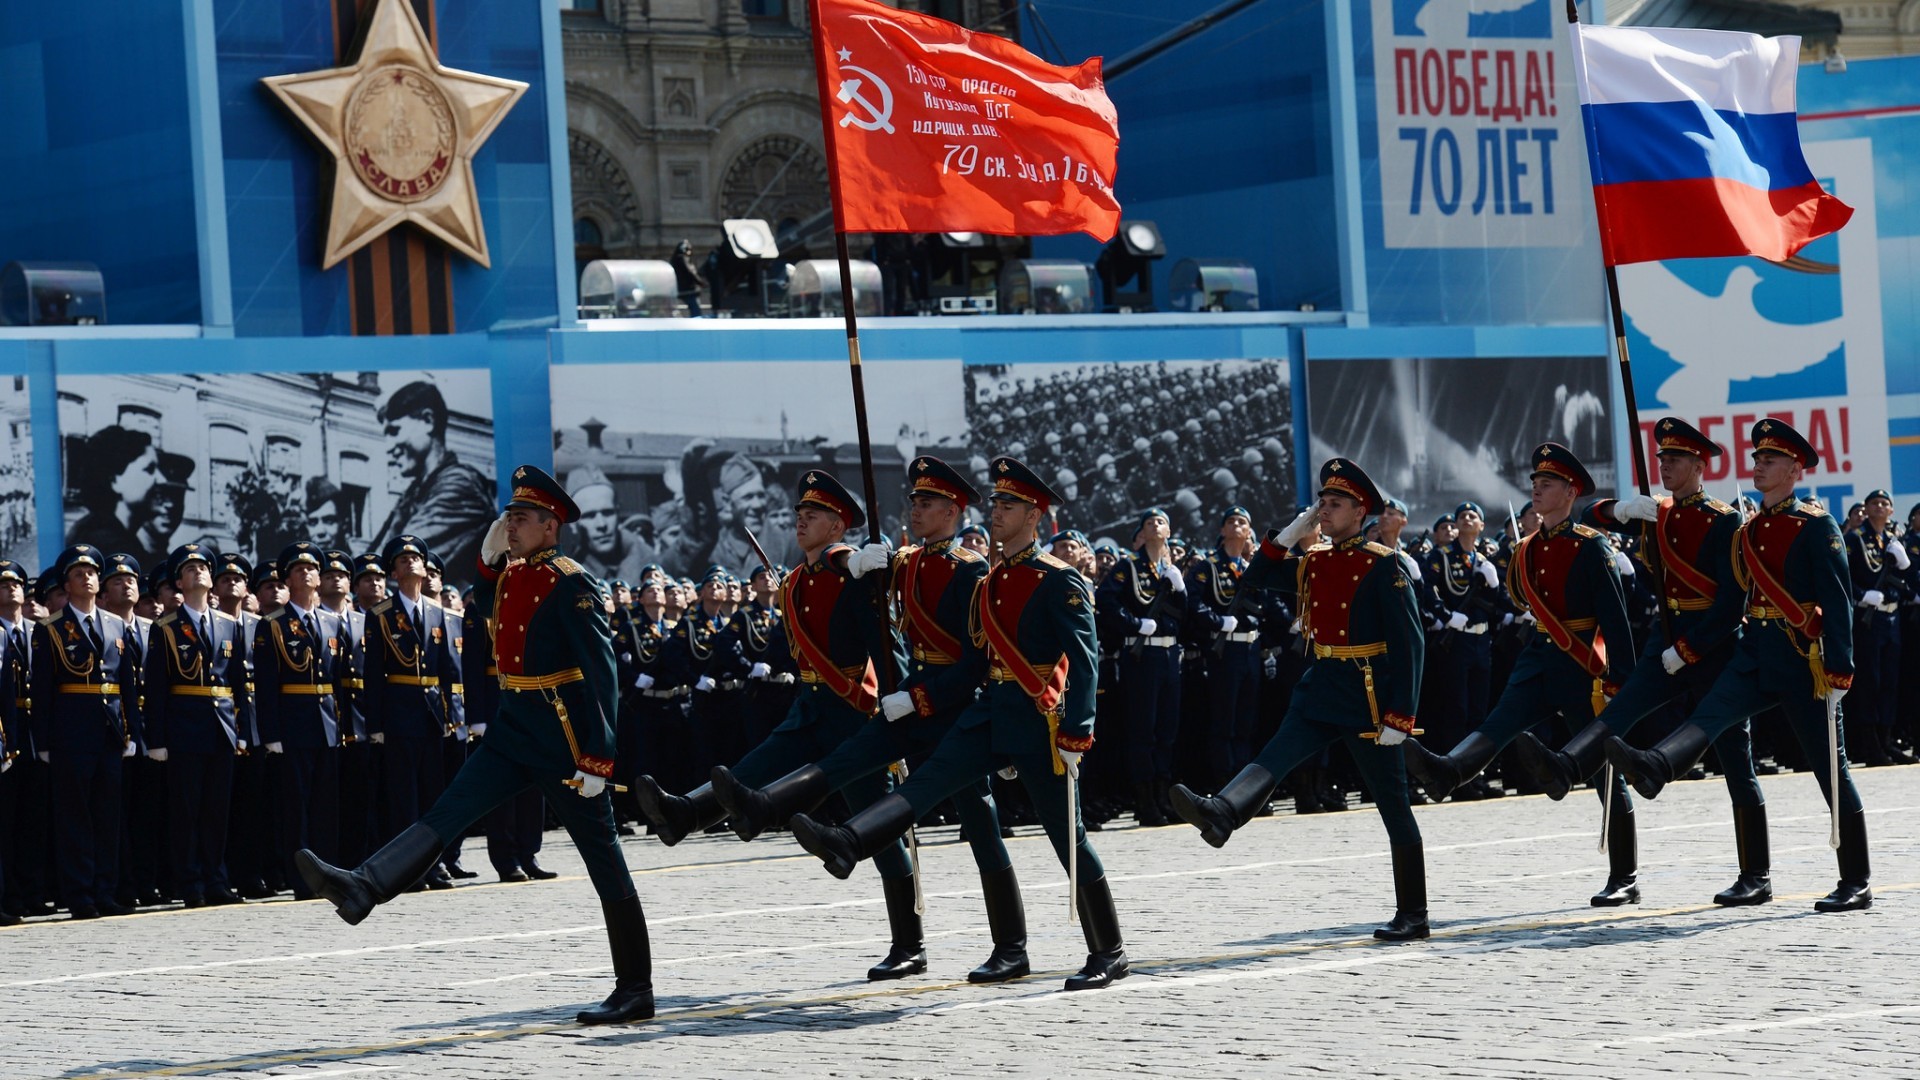 General 1920x1080 military Victory Day Moscow Russia soldier men flag parade hammer and sickle Russian Army